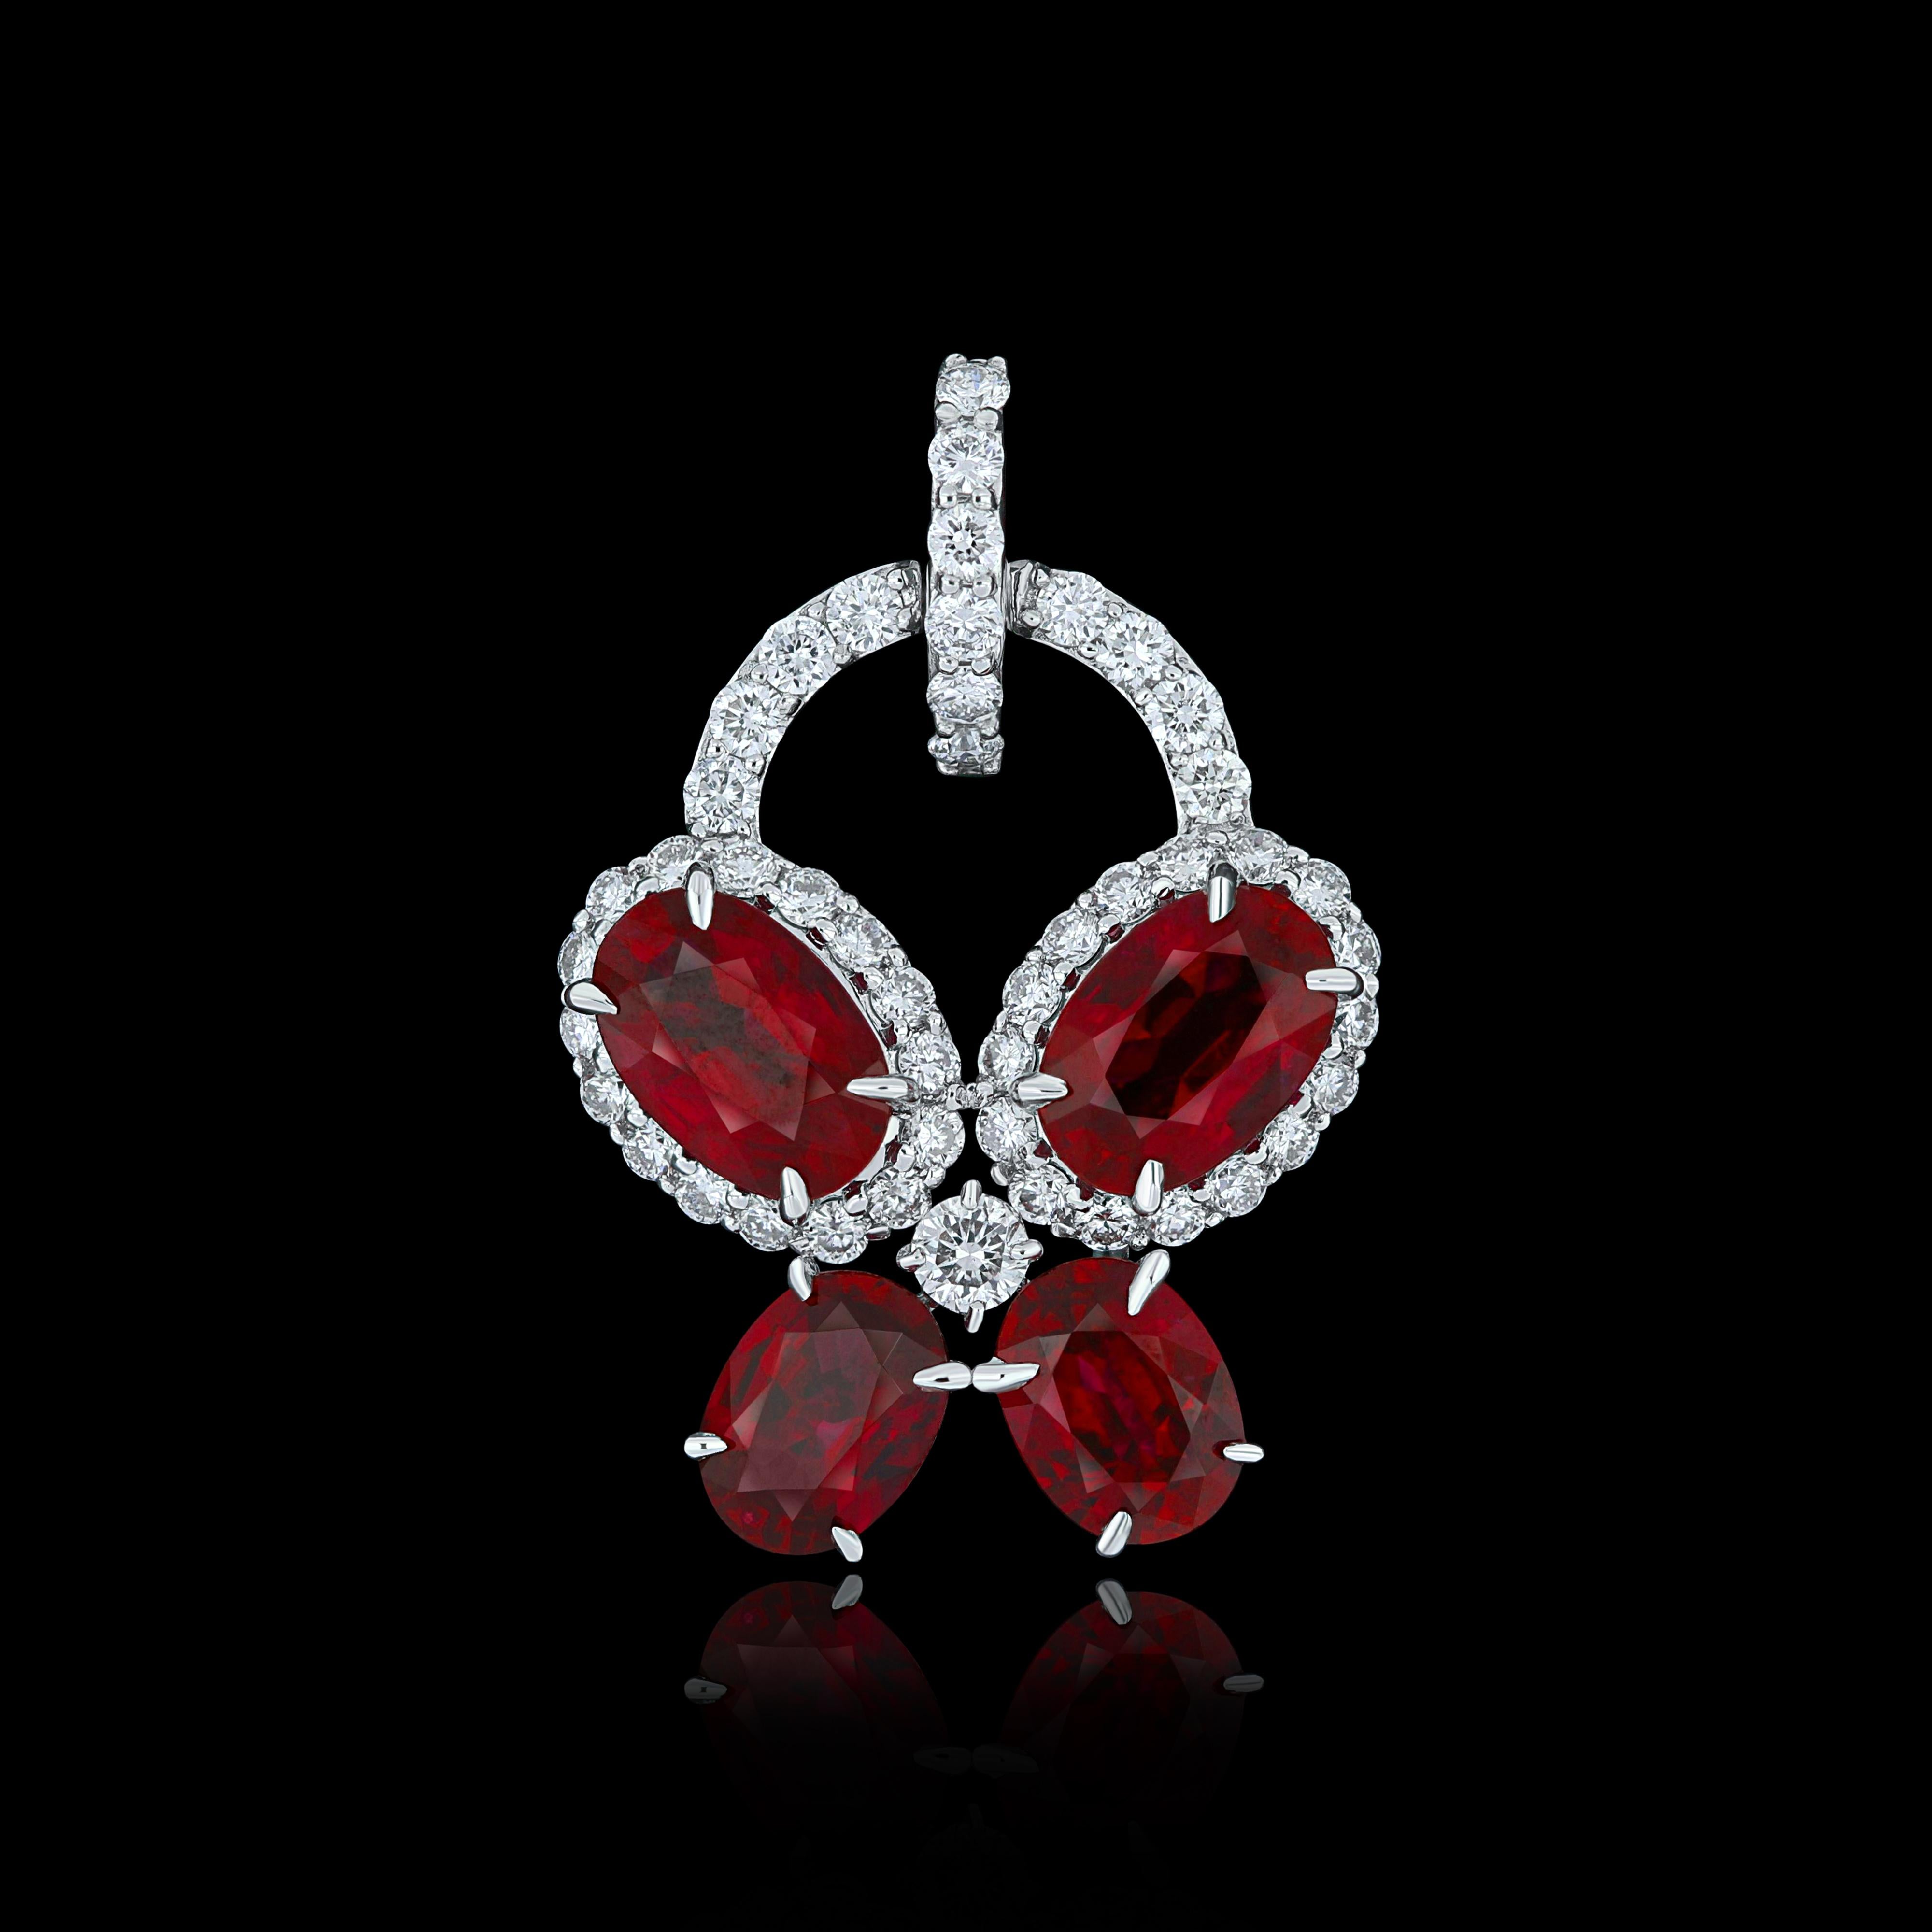 Elegant and exquisitely detailed 18 Karat White Gold Pendant, center set with 1.71 Cts .Oval Shape intense Red Mozambique Ruby  and micro pave set Diamonds, weighing approx. 0.35 Cts Beautifully Hand crafted in 18 Karat White Gold.

Stone